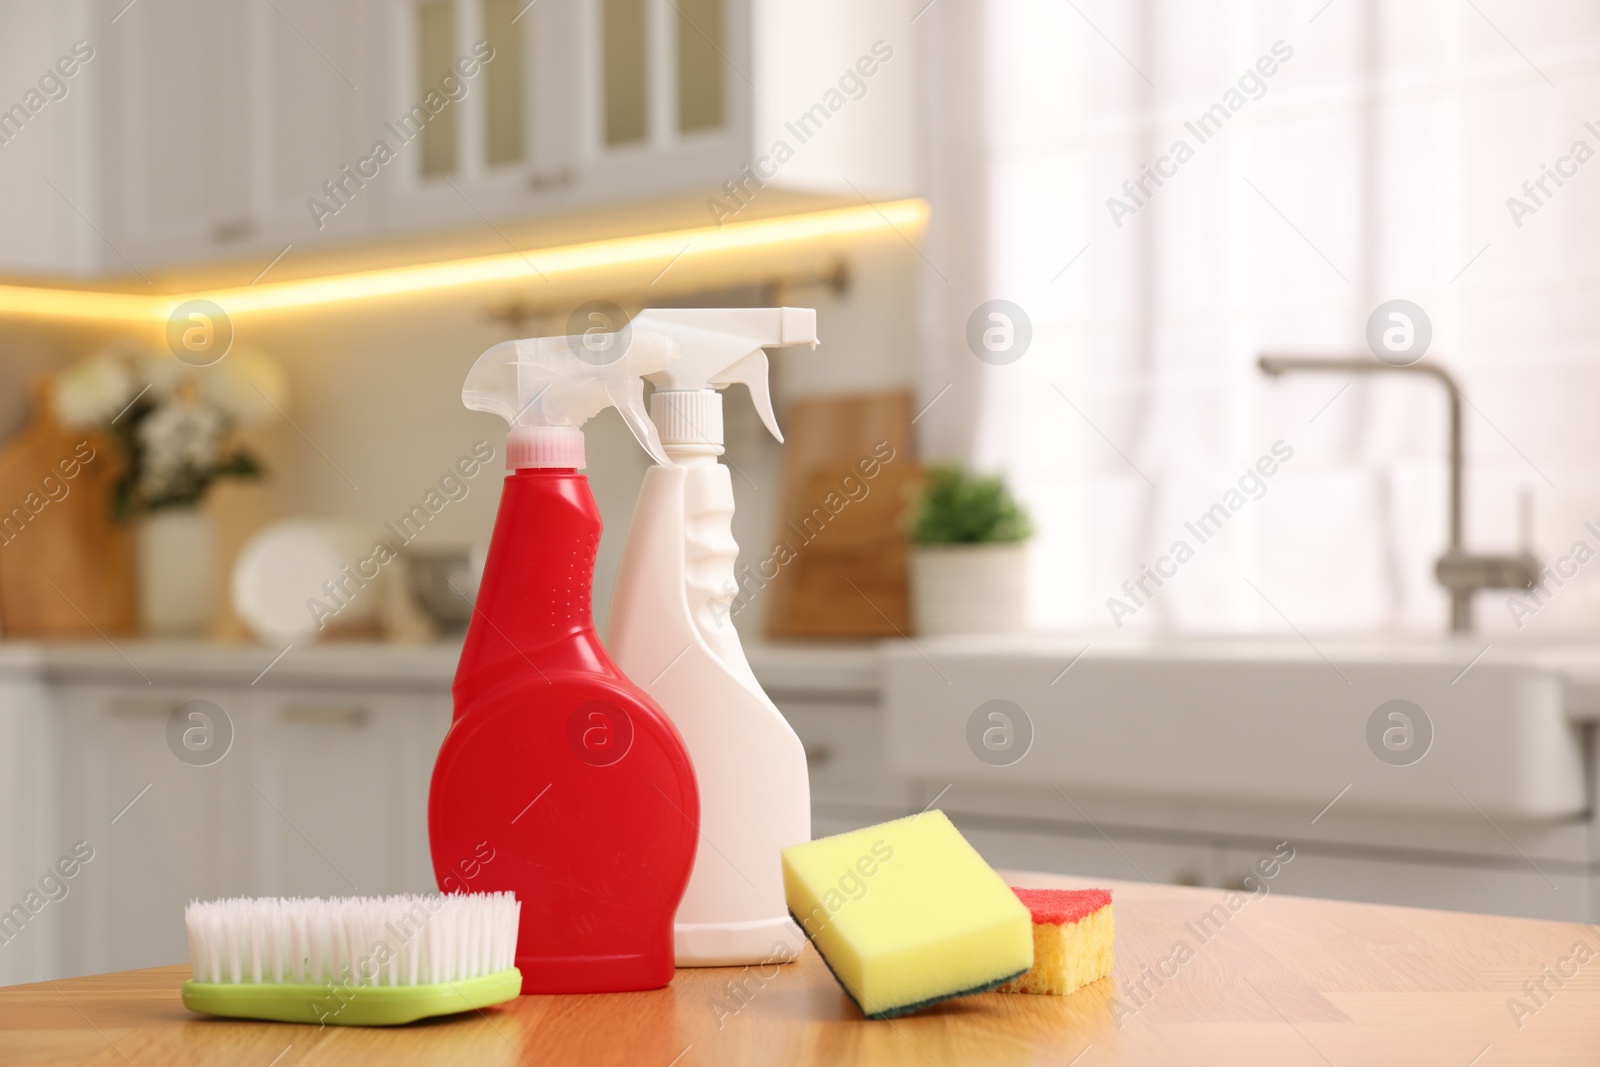 Photo of Cleaning service. Detergents, sponges and brush on table in kitchen. Space for text